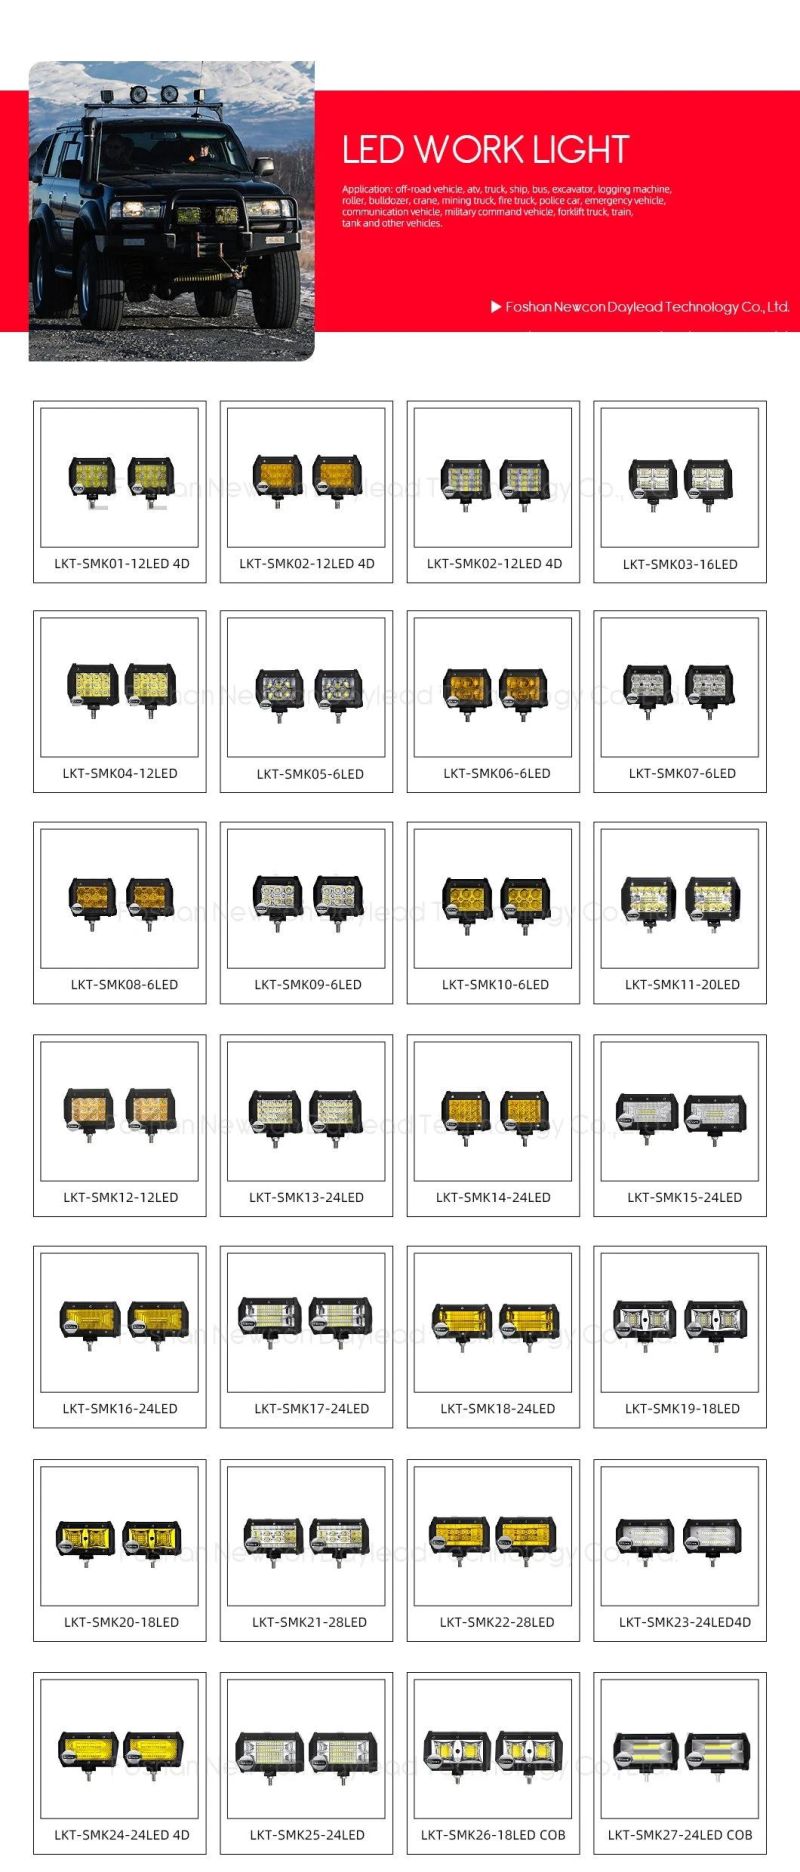 Super Bright and Wide Illumination Range LED Driving Lights for Truck Vehicle